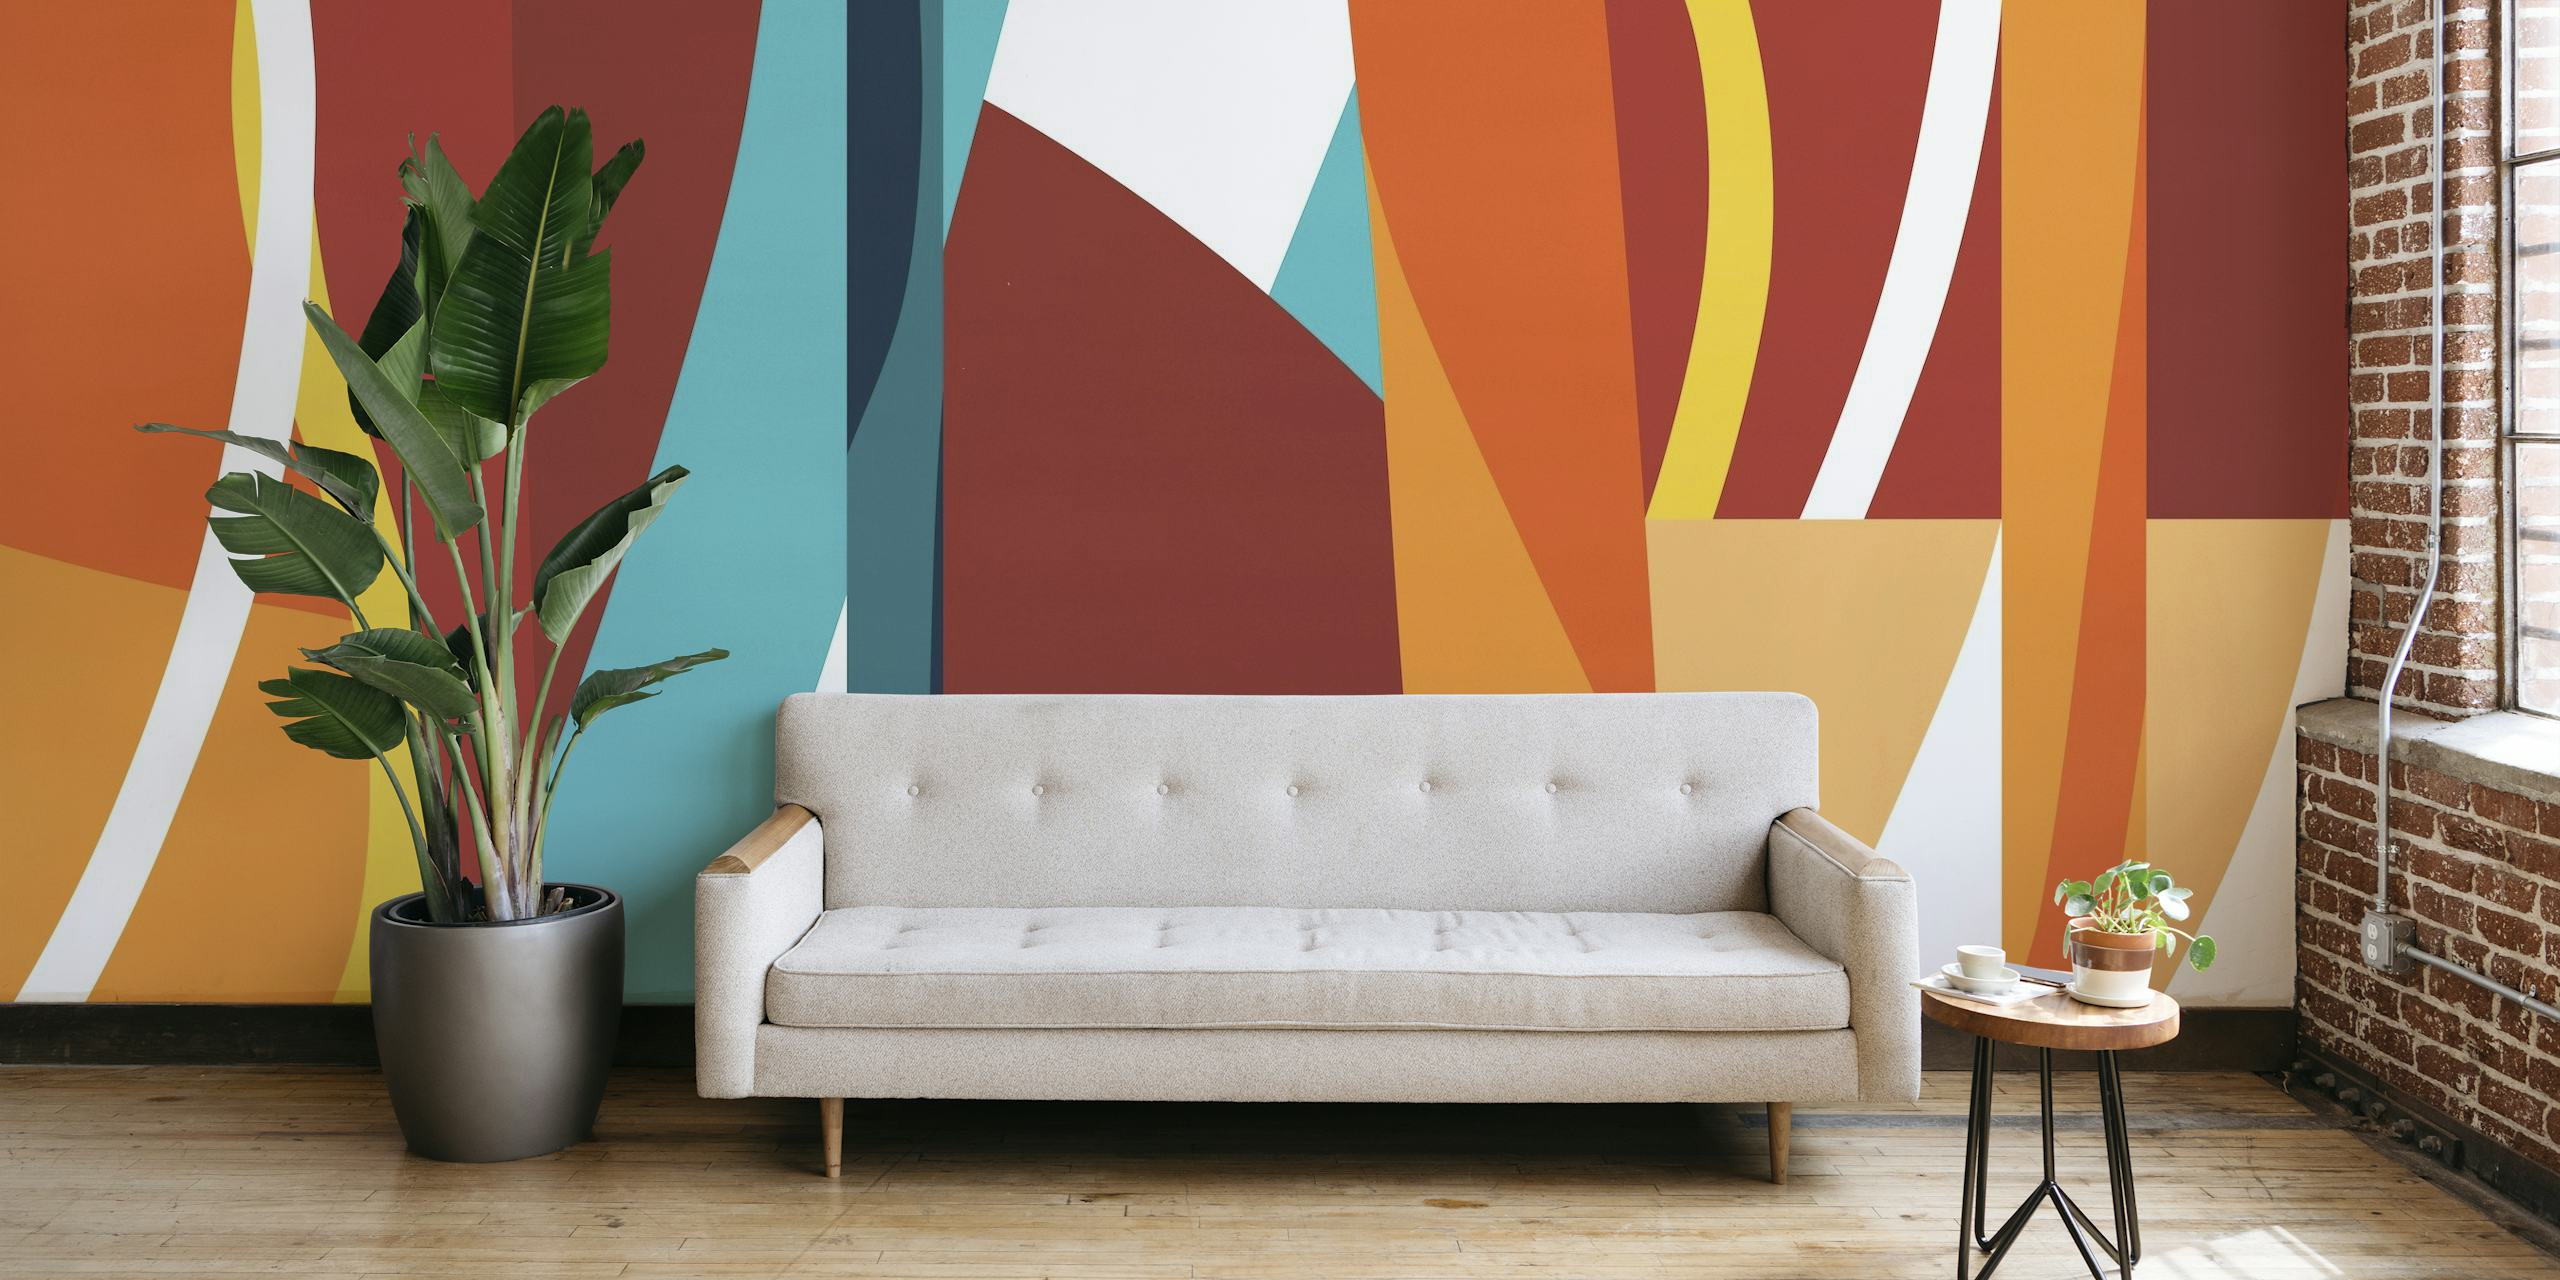 Dynamic abstract wall mural with colored strokes in red, orange, yellow, and blue